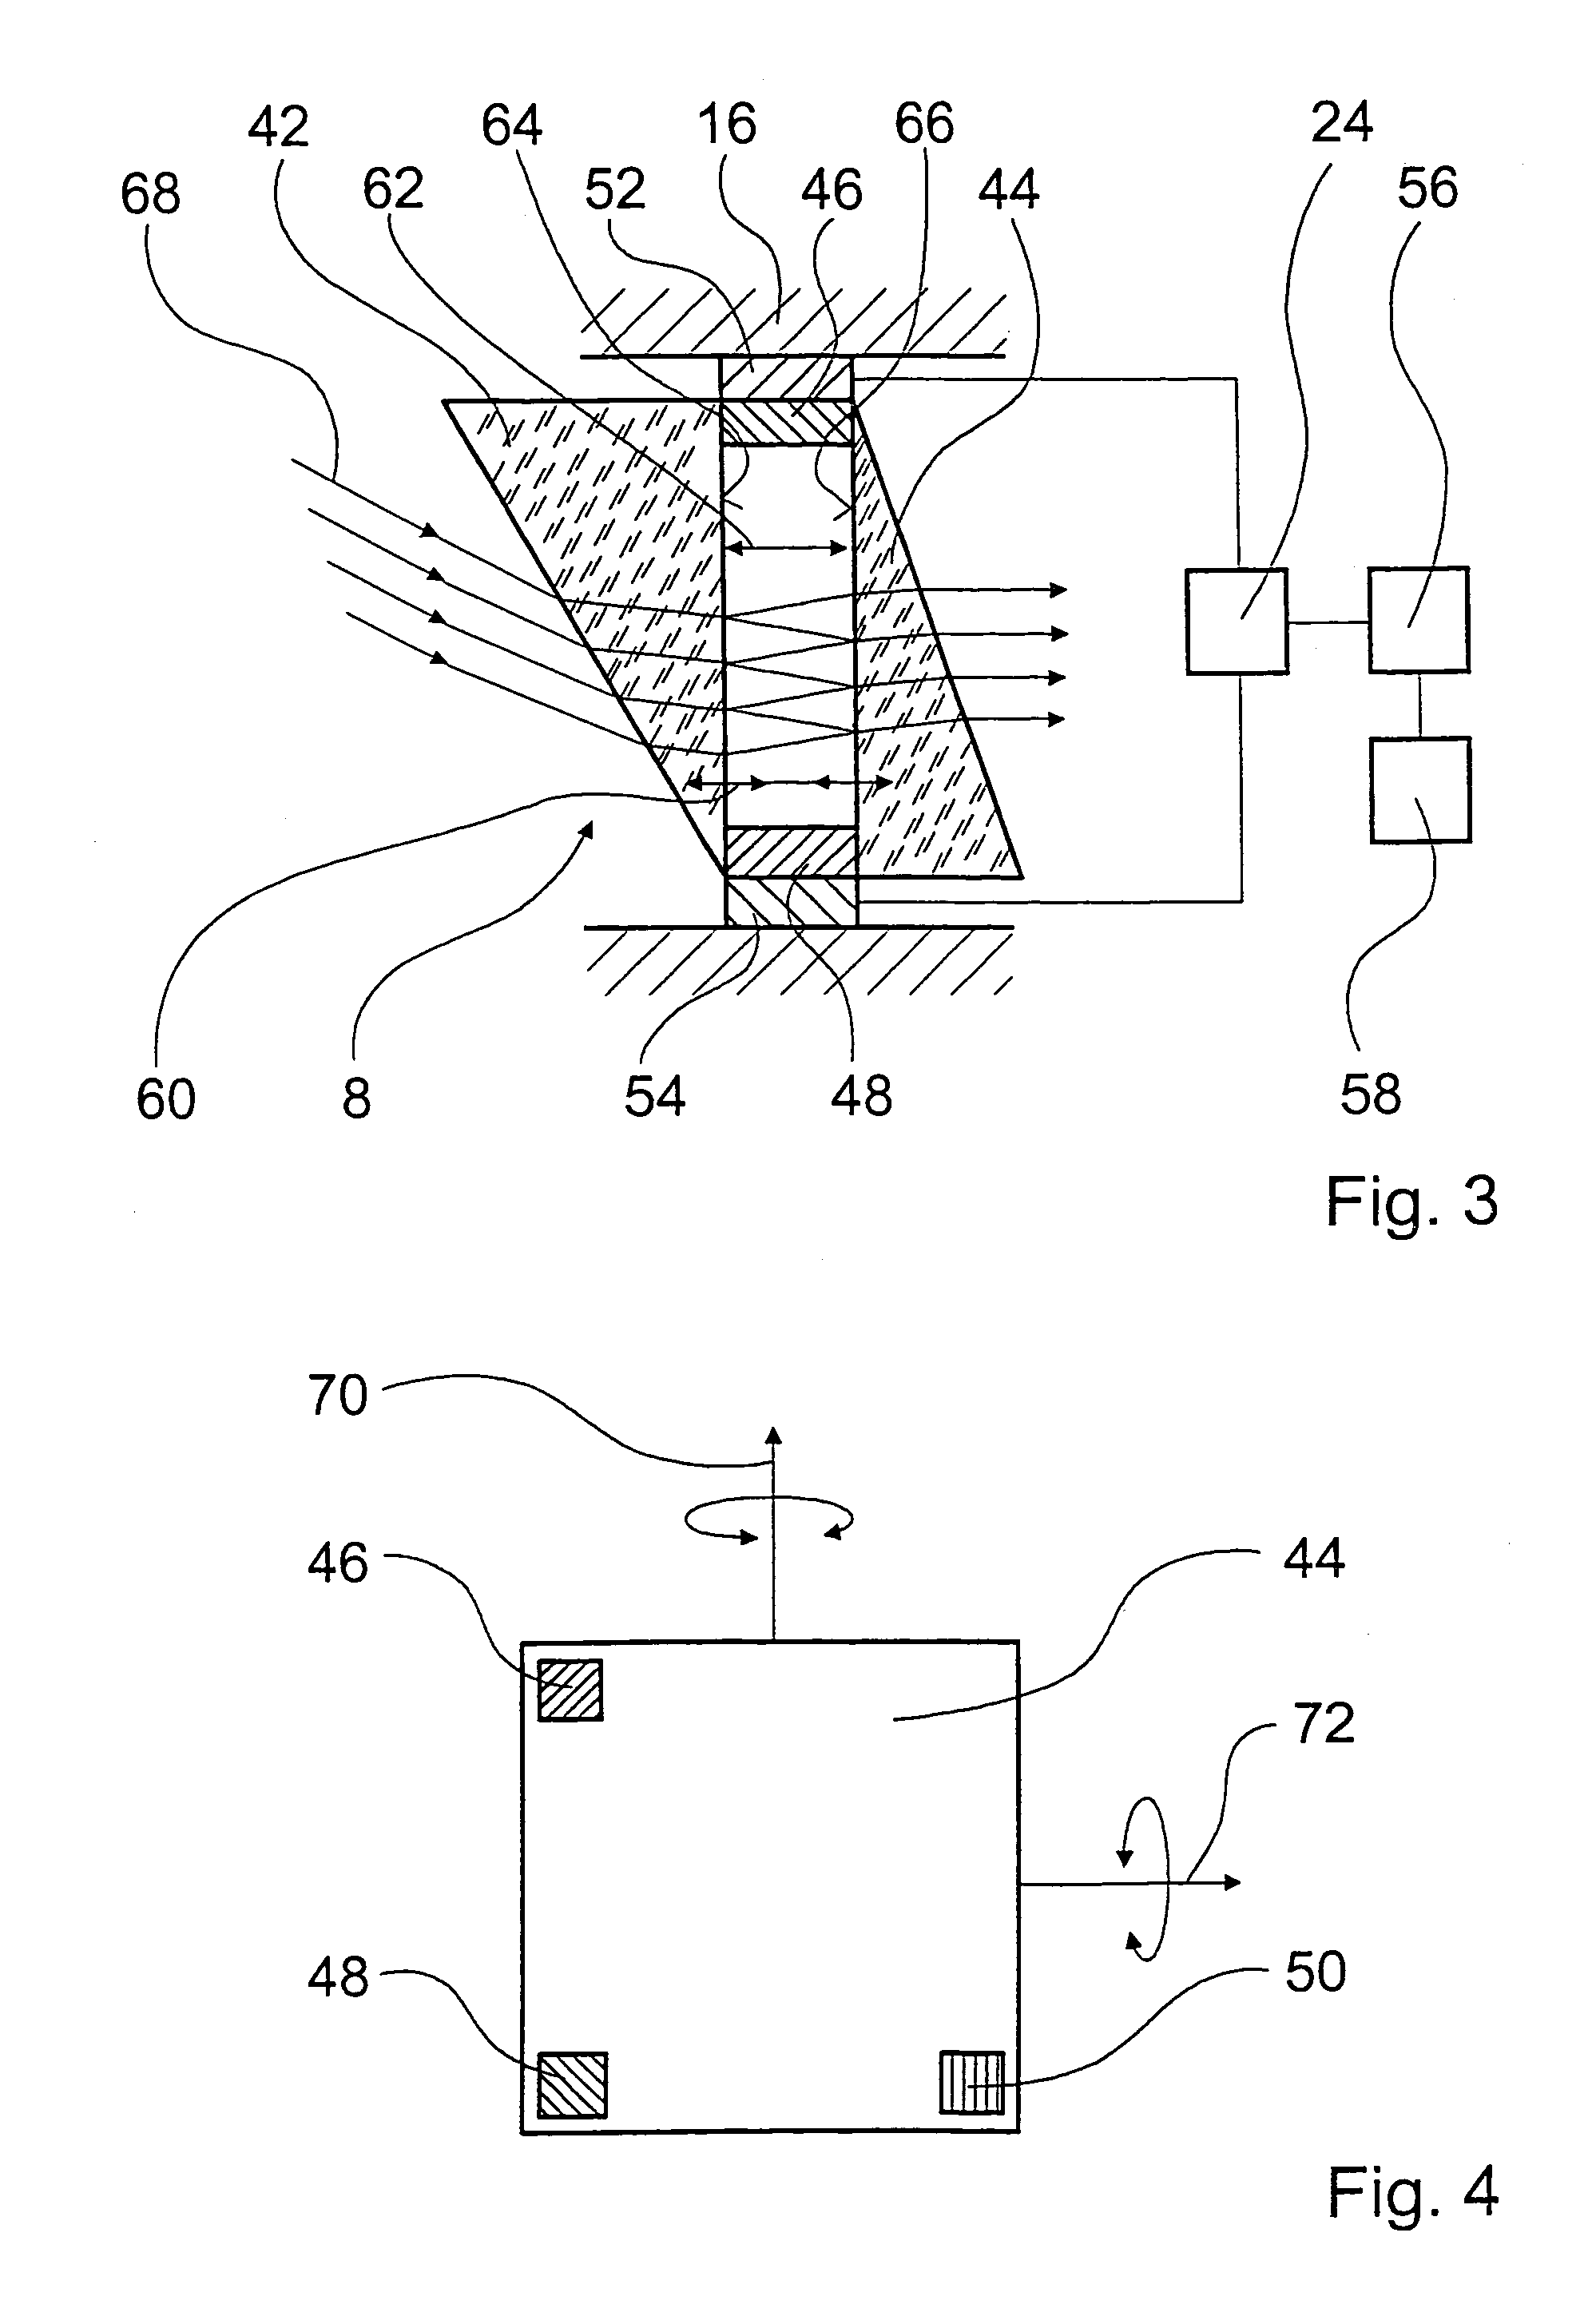 Optical arrangement for a homing head with movable optical elements